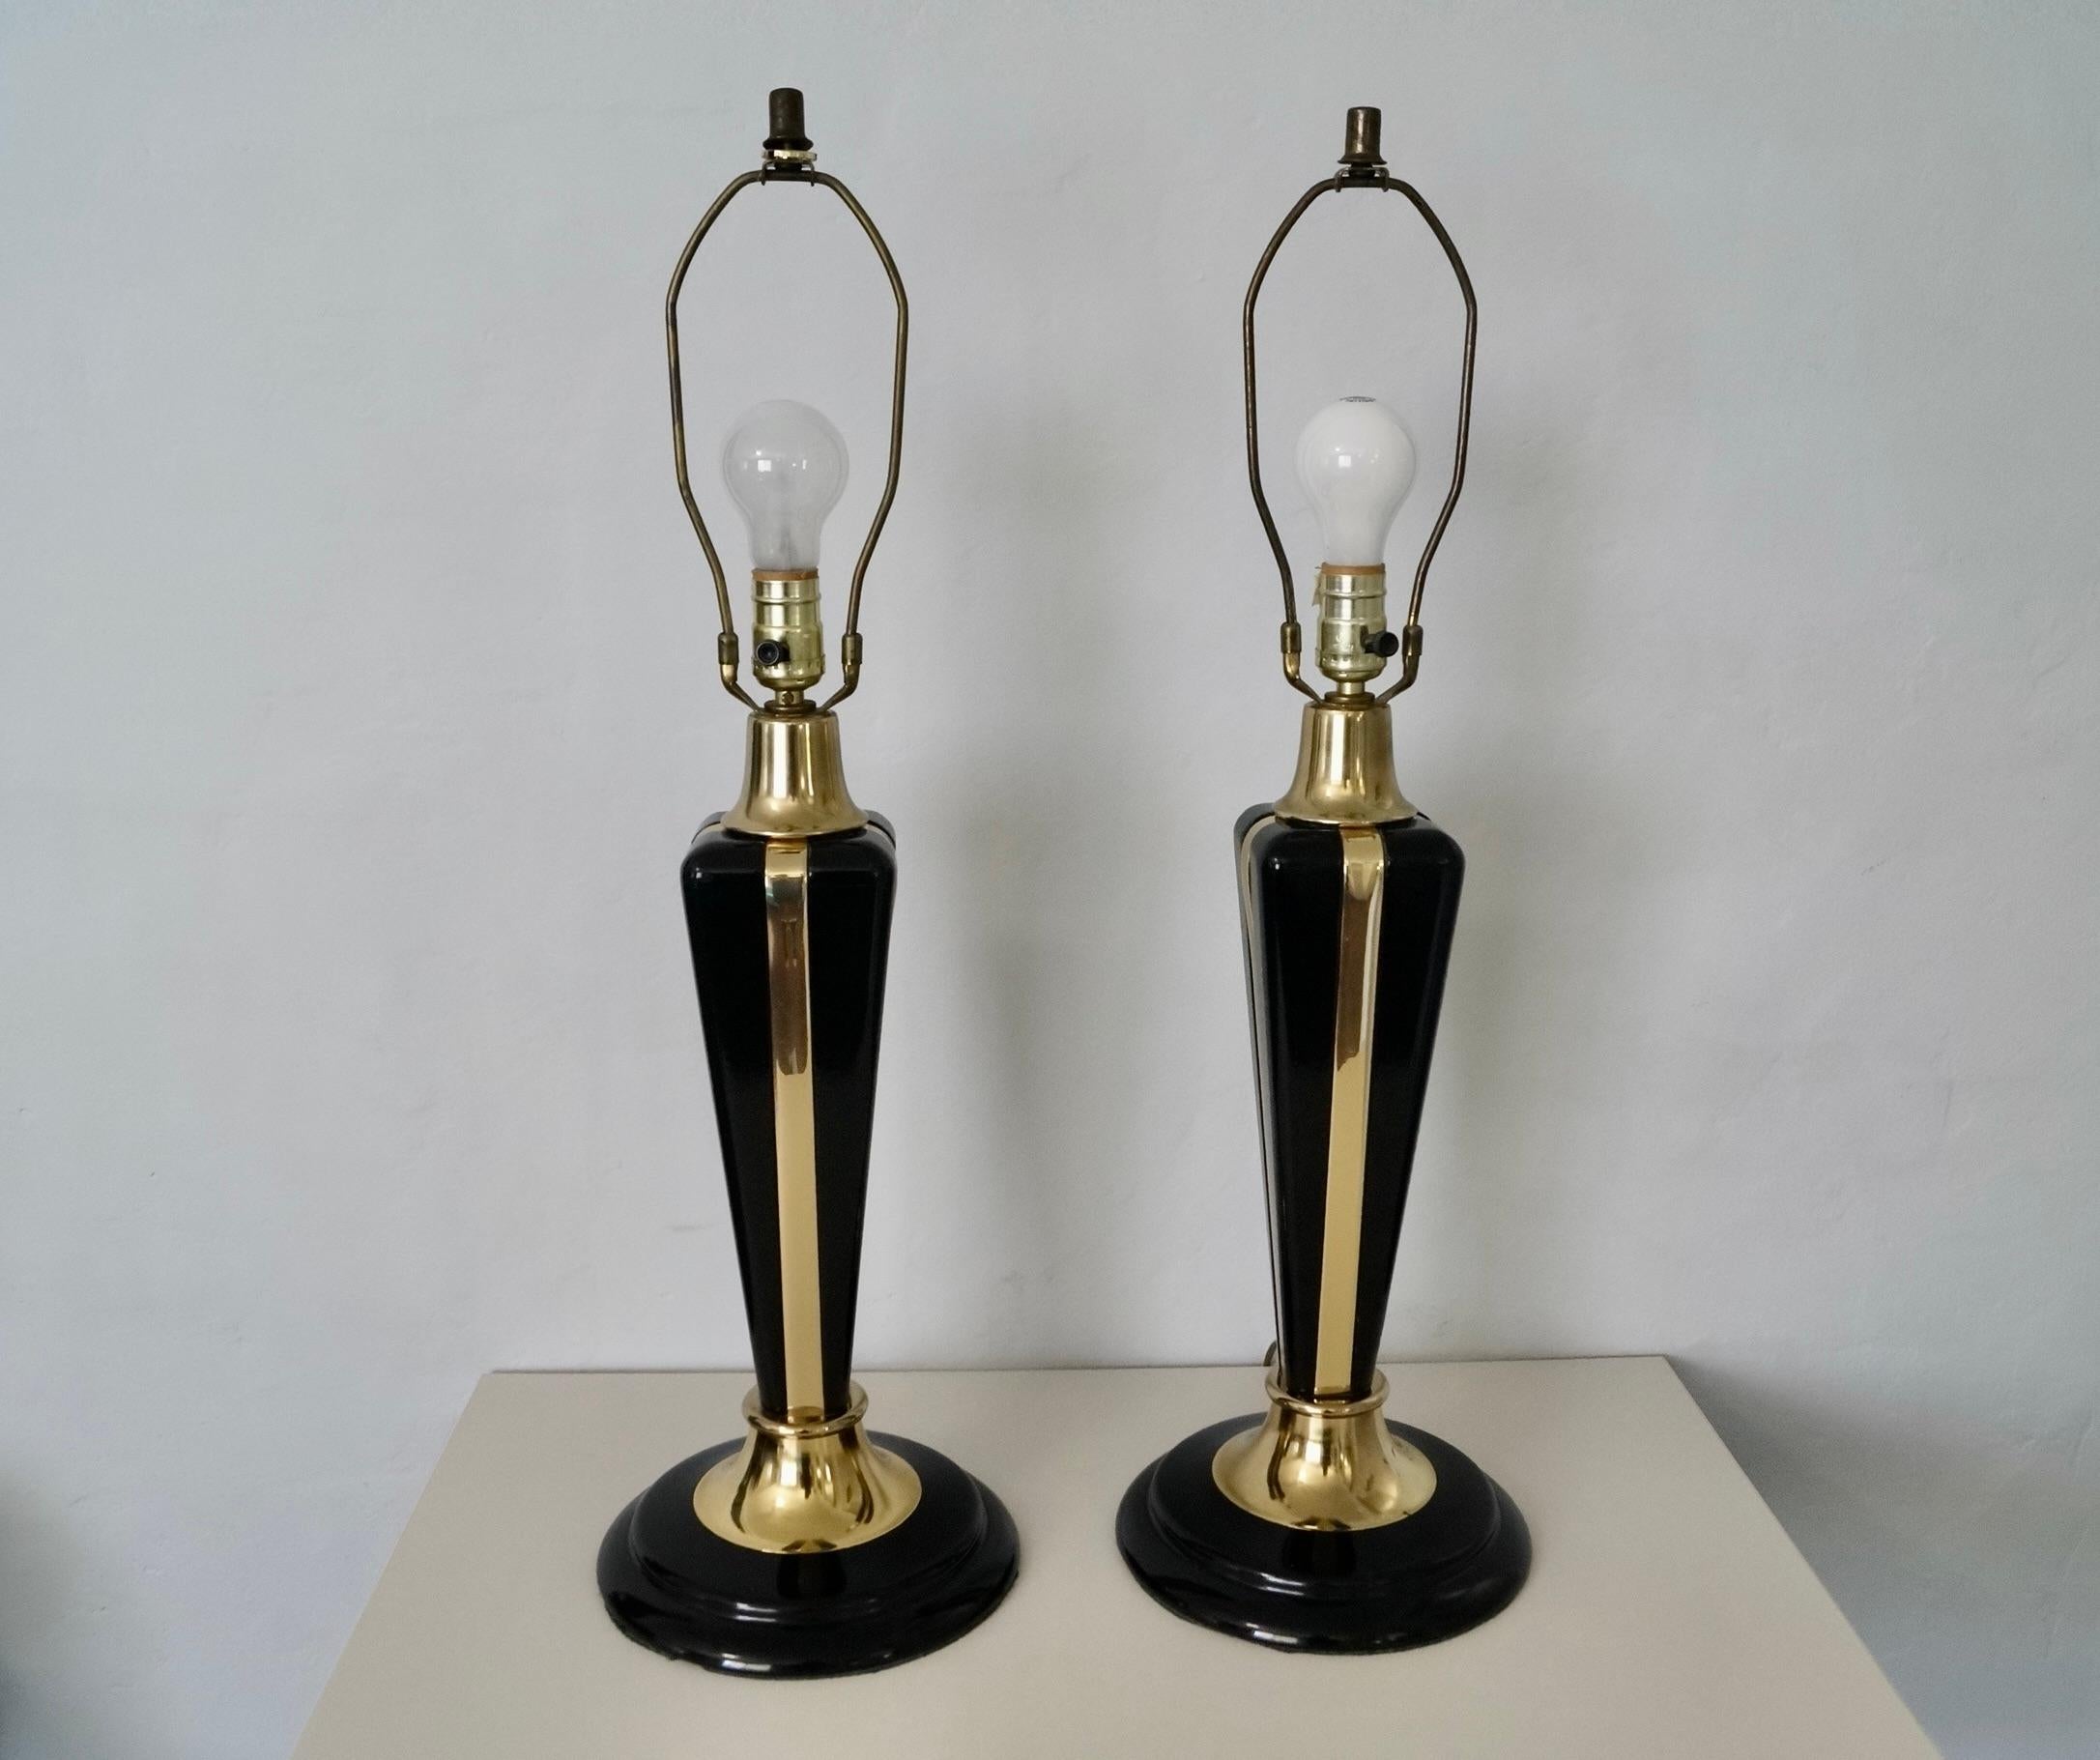 Pair of 1980's Art Deco Bella Lighting Hollywood Regency Table Lamps In Good Condition For Sale In Burbank, CA